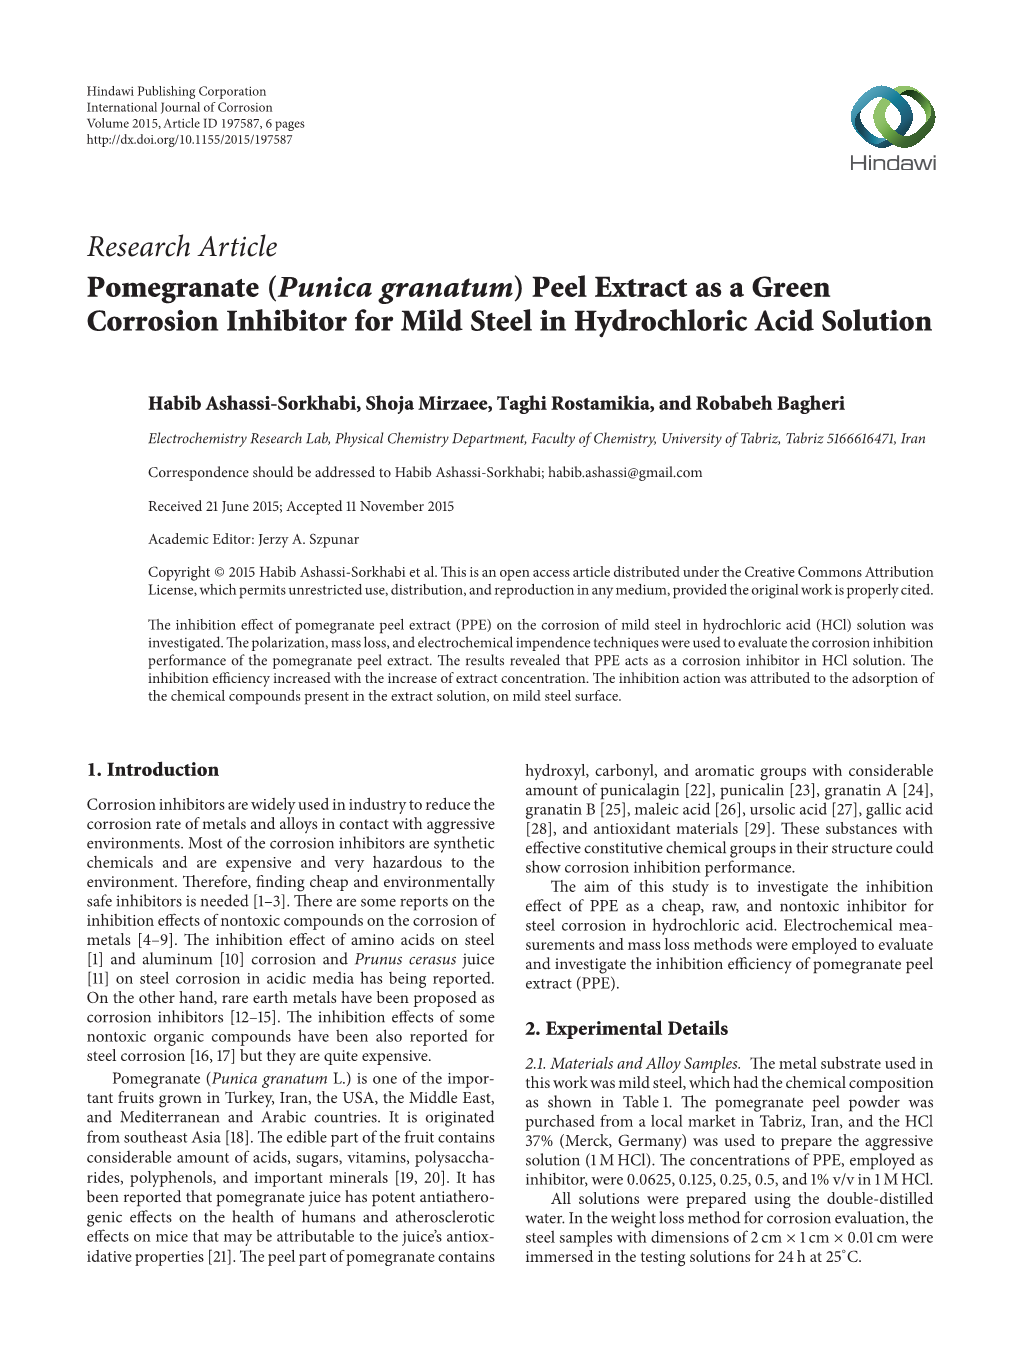 (Punica Granatum) Peel Extract As a Green Corrosion Inhibitor for Mild Steel in Hydrochloric Acid Solution